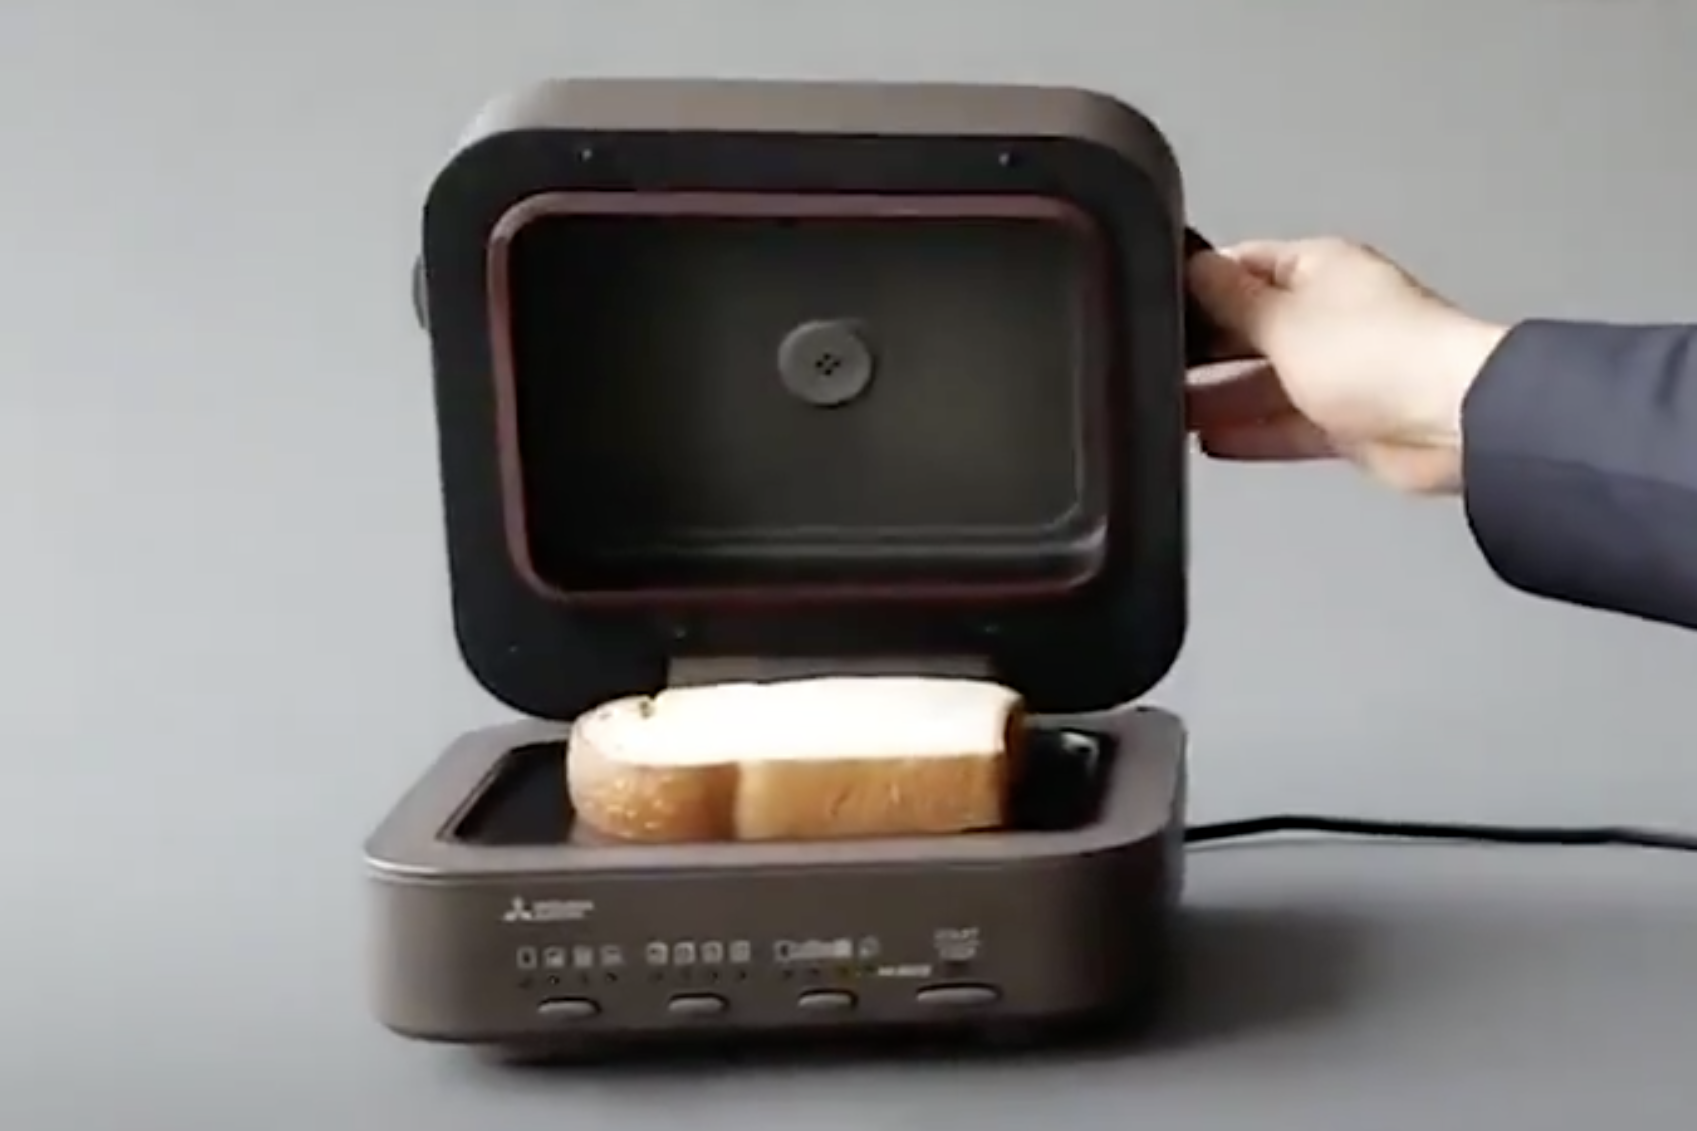 Japanese toaster designed by Mitsubishi costs £215 and makes just